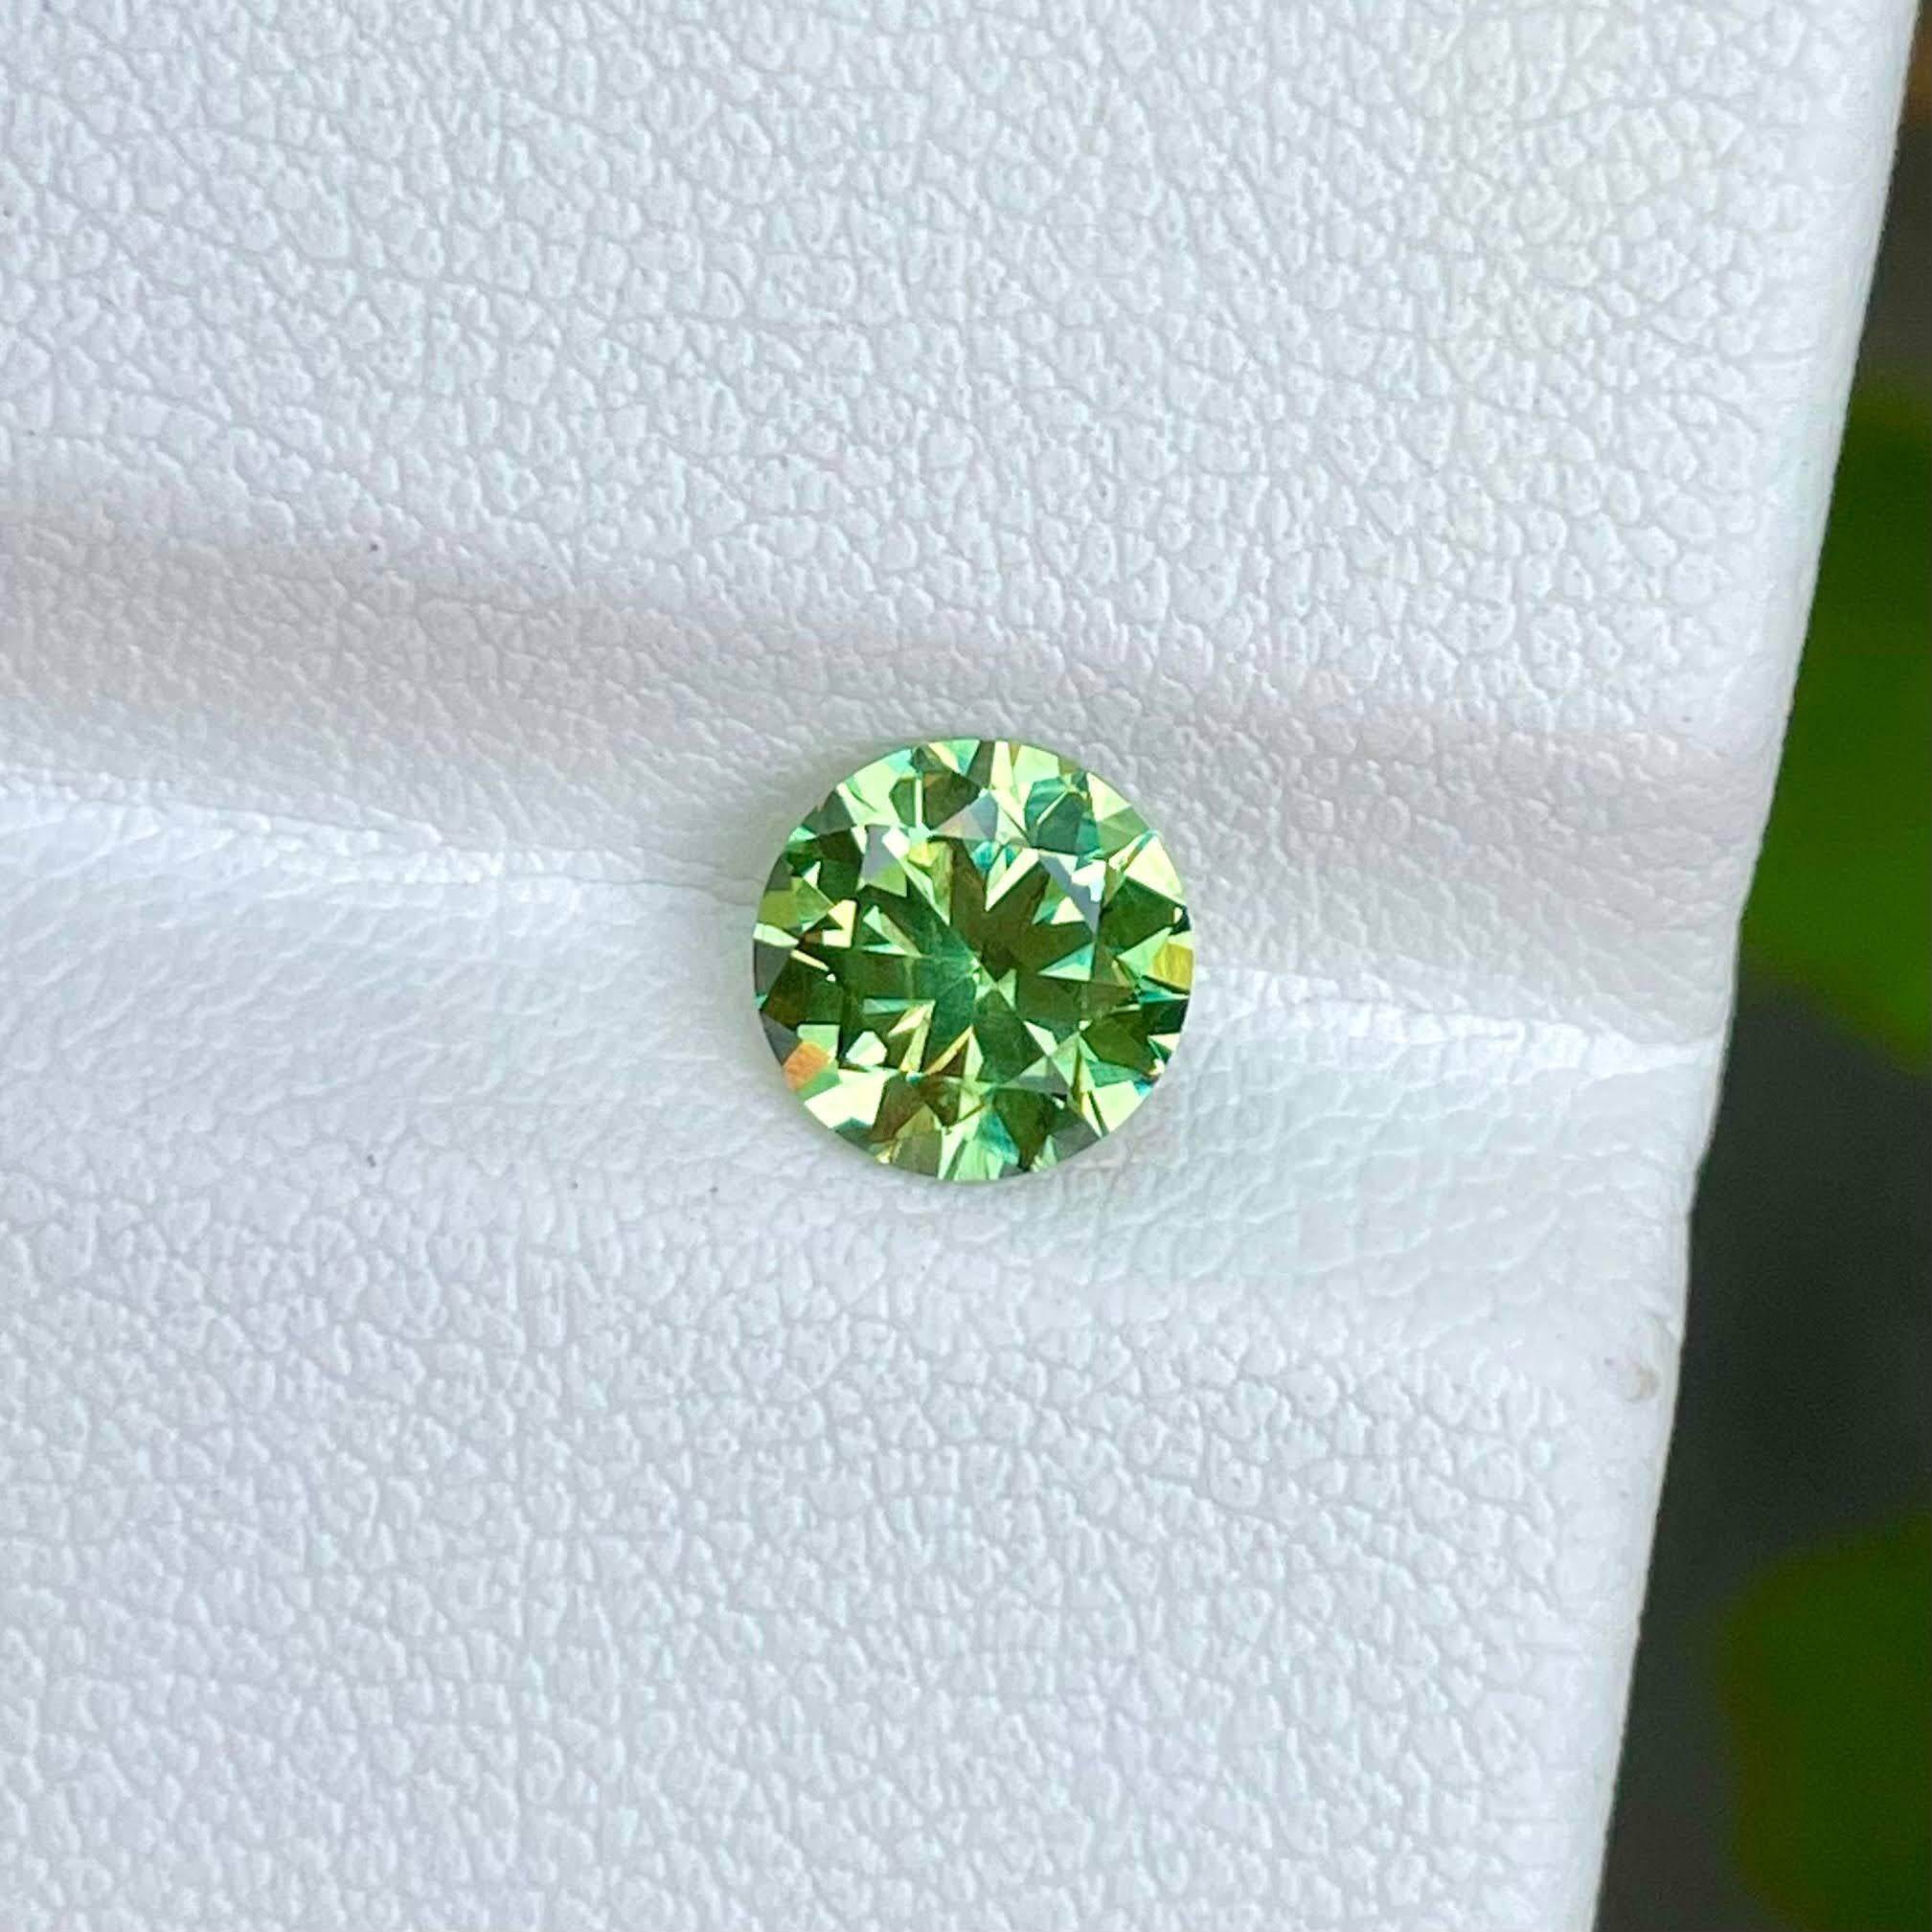 Weight : 1.30 carats 
Dimensions : 6.55x4.15 mm
Clarity VVS (horsetail inclusion)
Origin Russia
Treatment None
Shape Round
Cut Diamond





The 1.30 carat Demantoid Garnet stone showcases the exquisite beauty of Russian gemstones with its Diamond